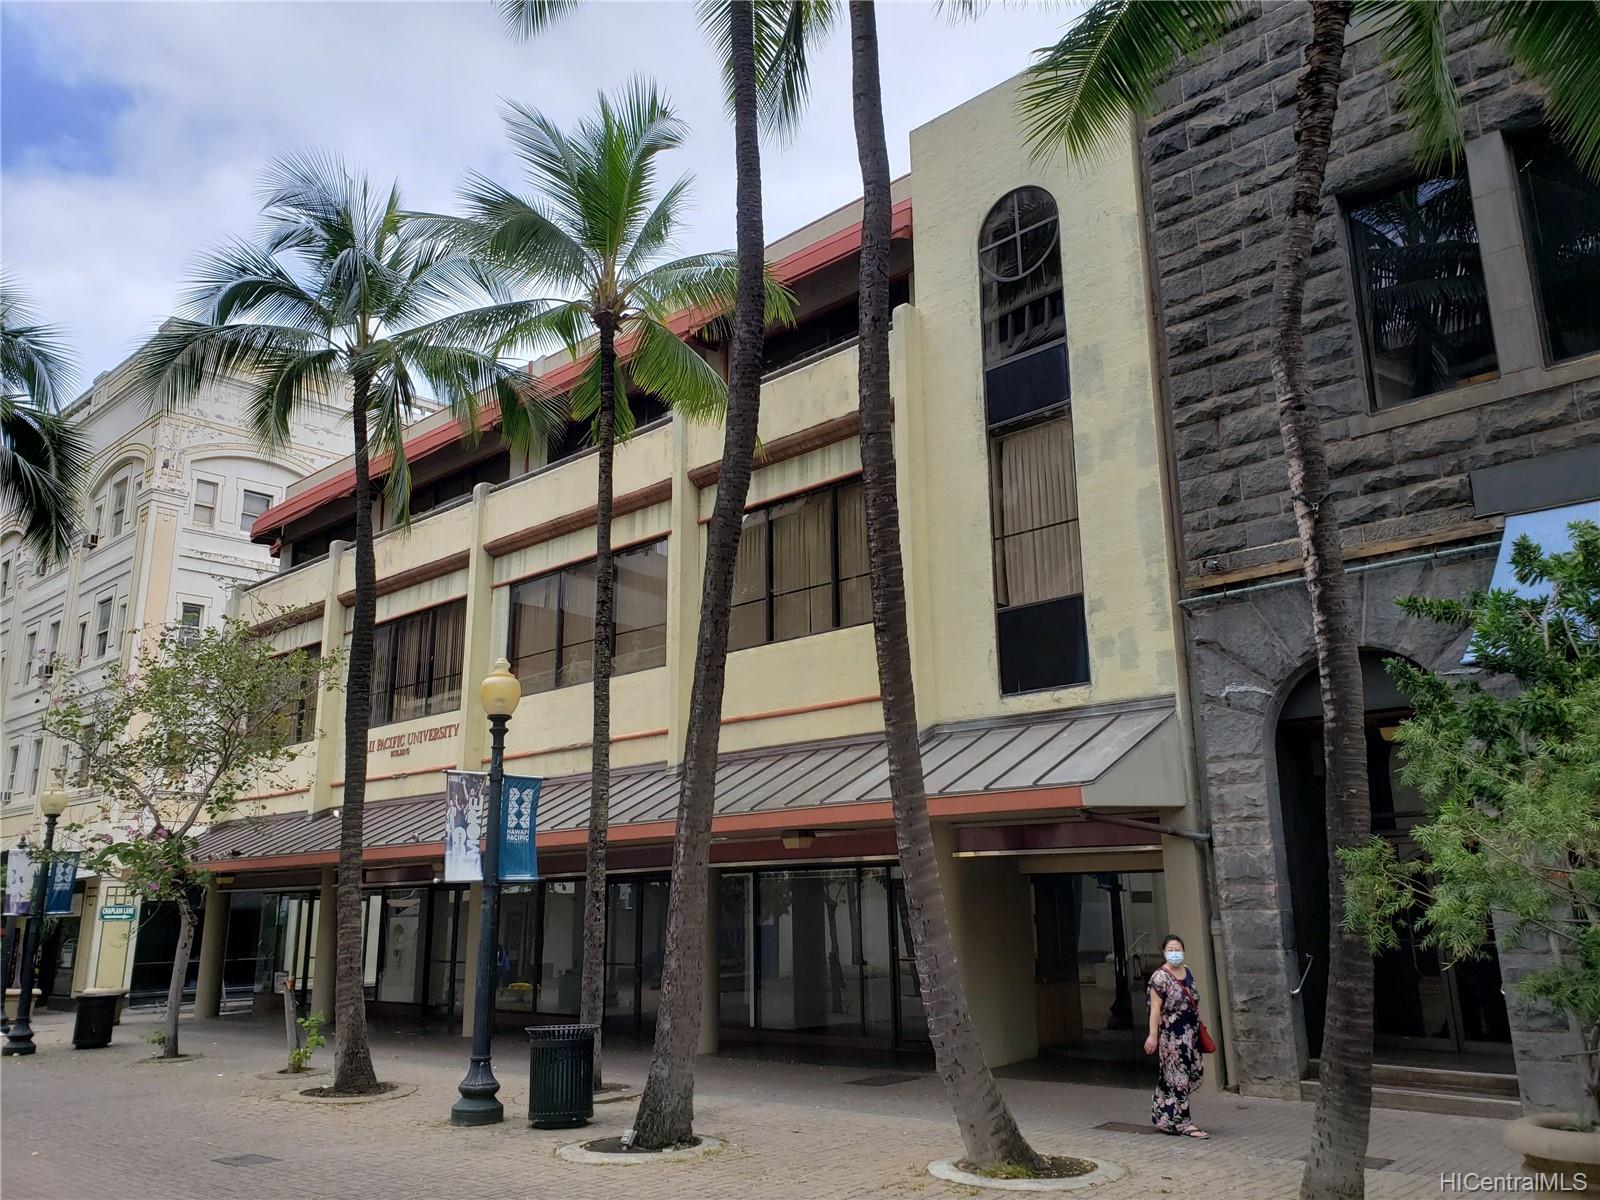 1166 Fort Street Mall Honolulu Oahu commercial real estate photo2 of 13